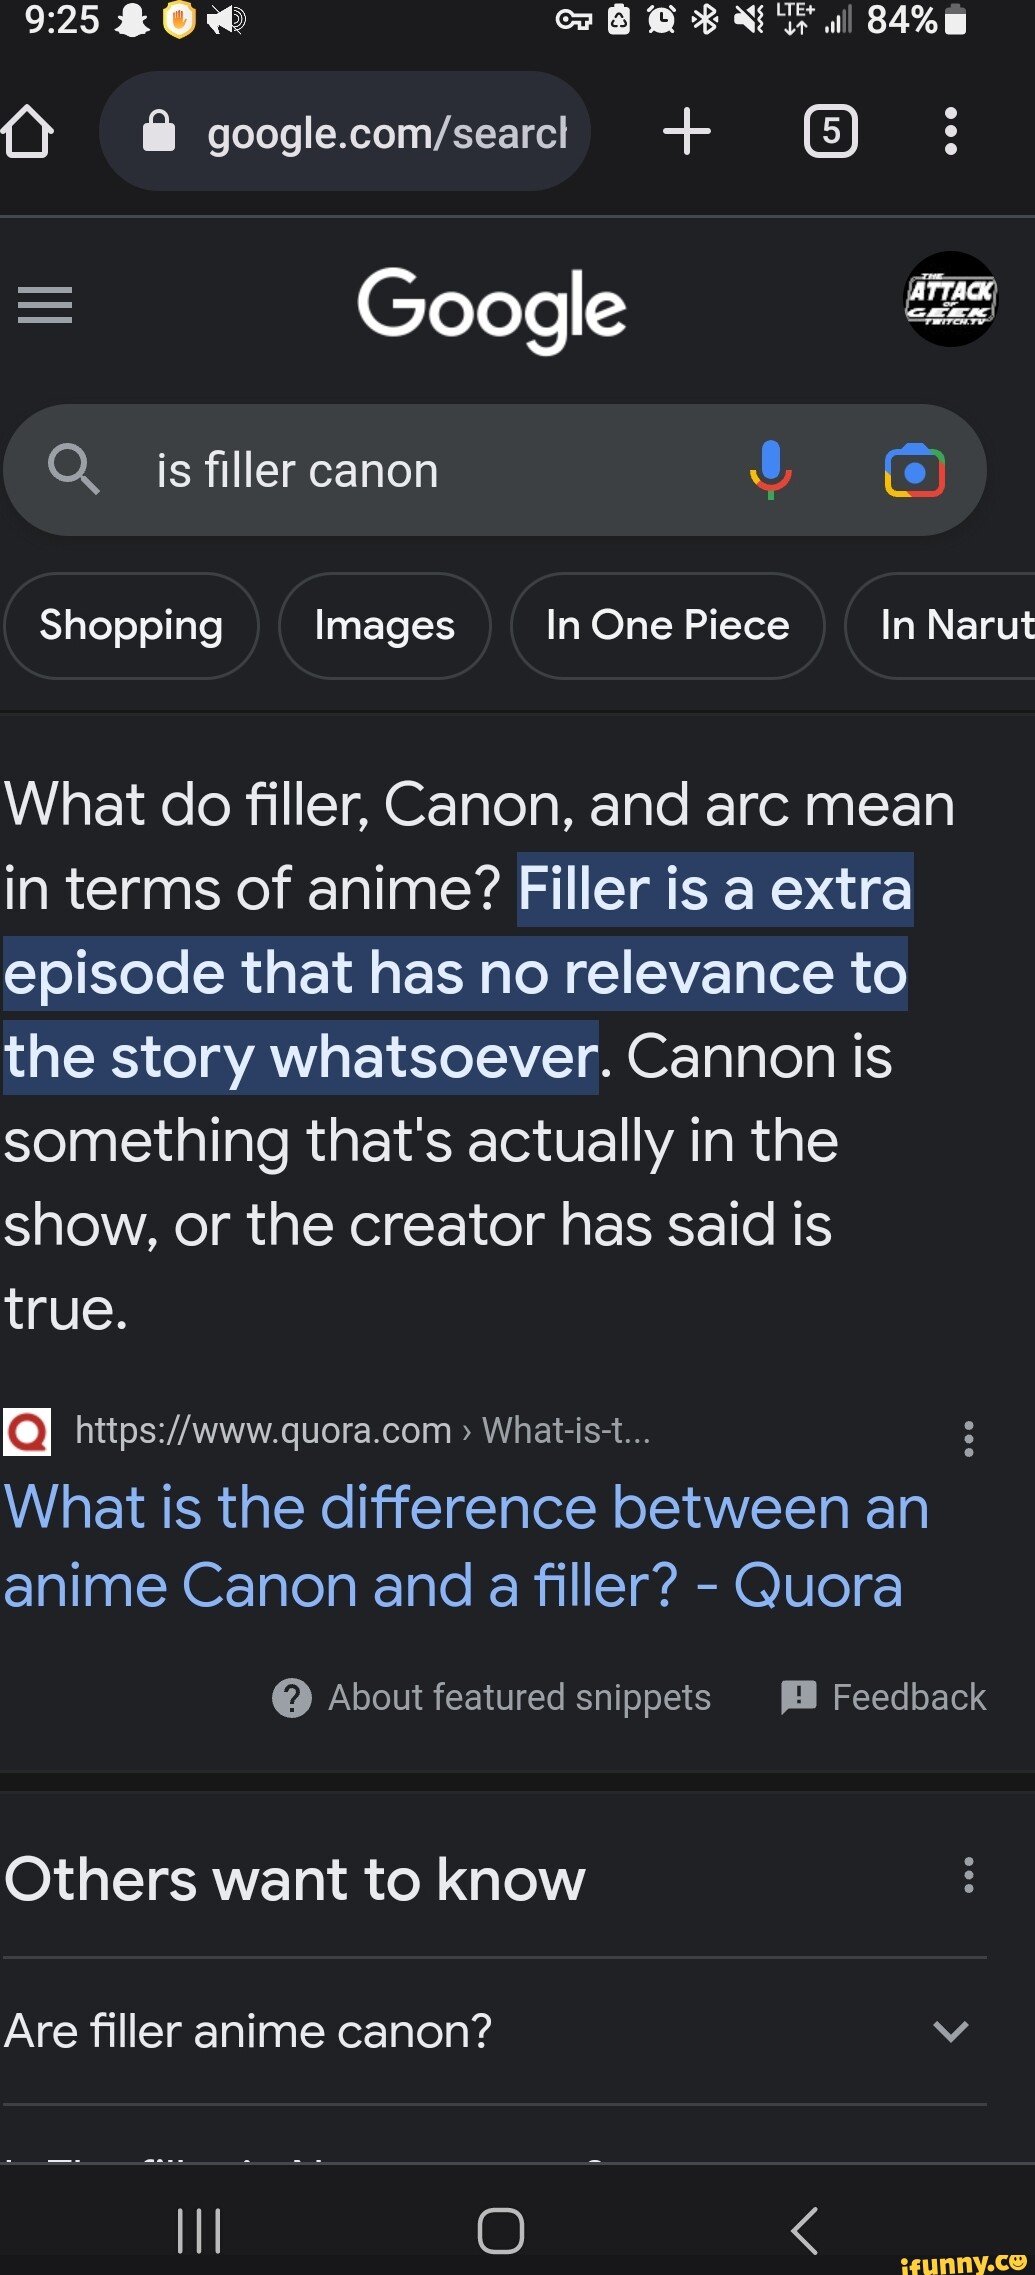 What is the difference between an anime Canon and a filler? - Quora